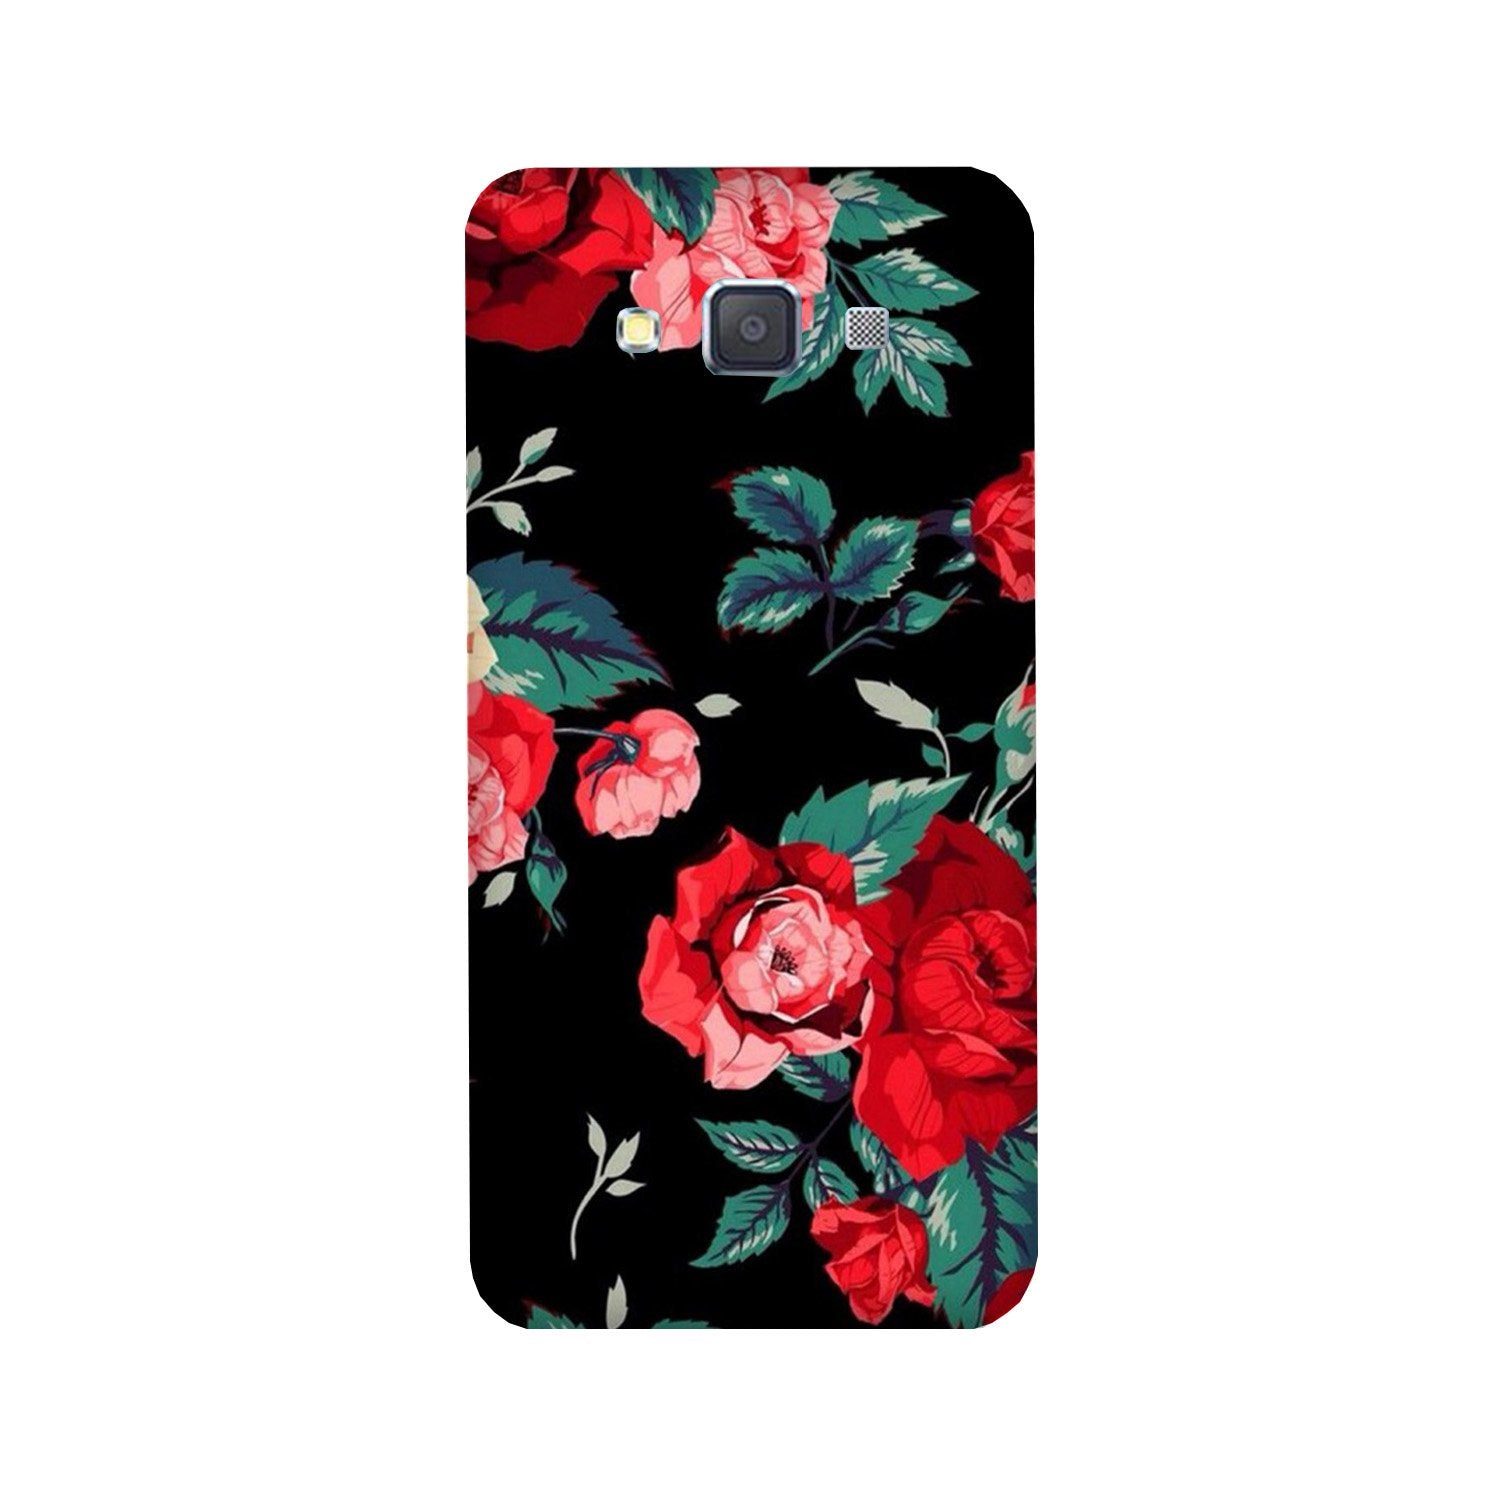 Red Rose2 Case for Galaxy J7 (2016)